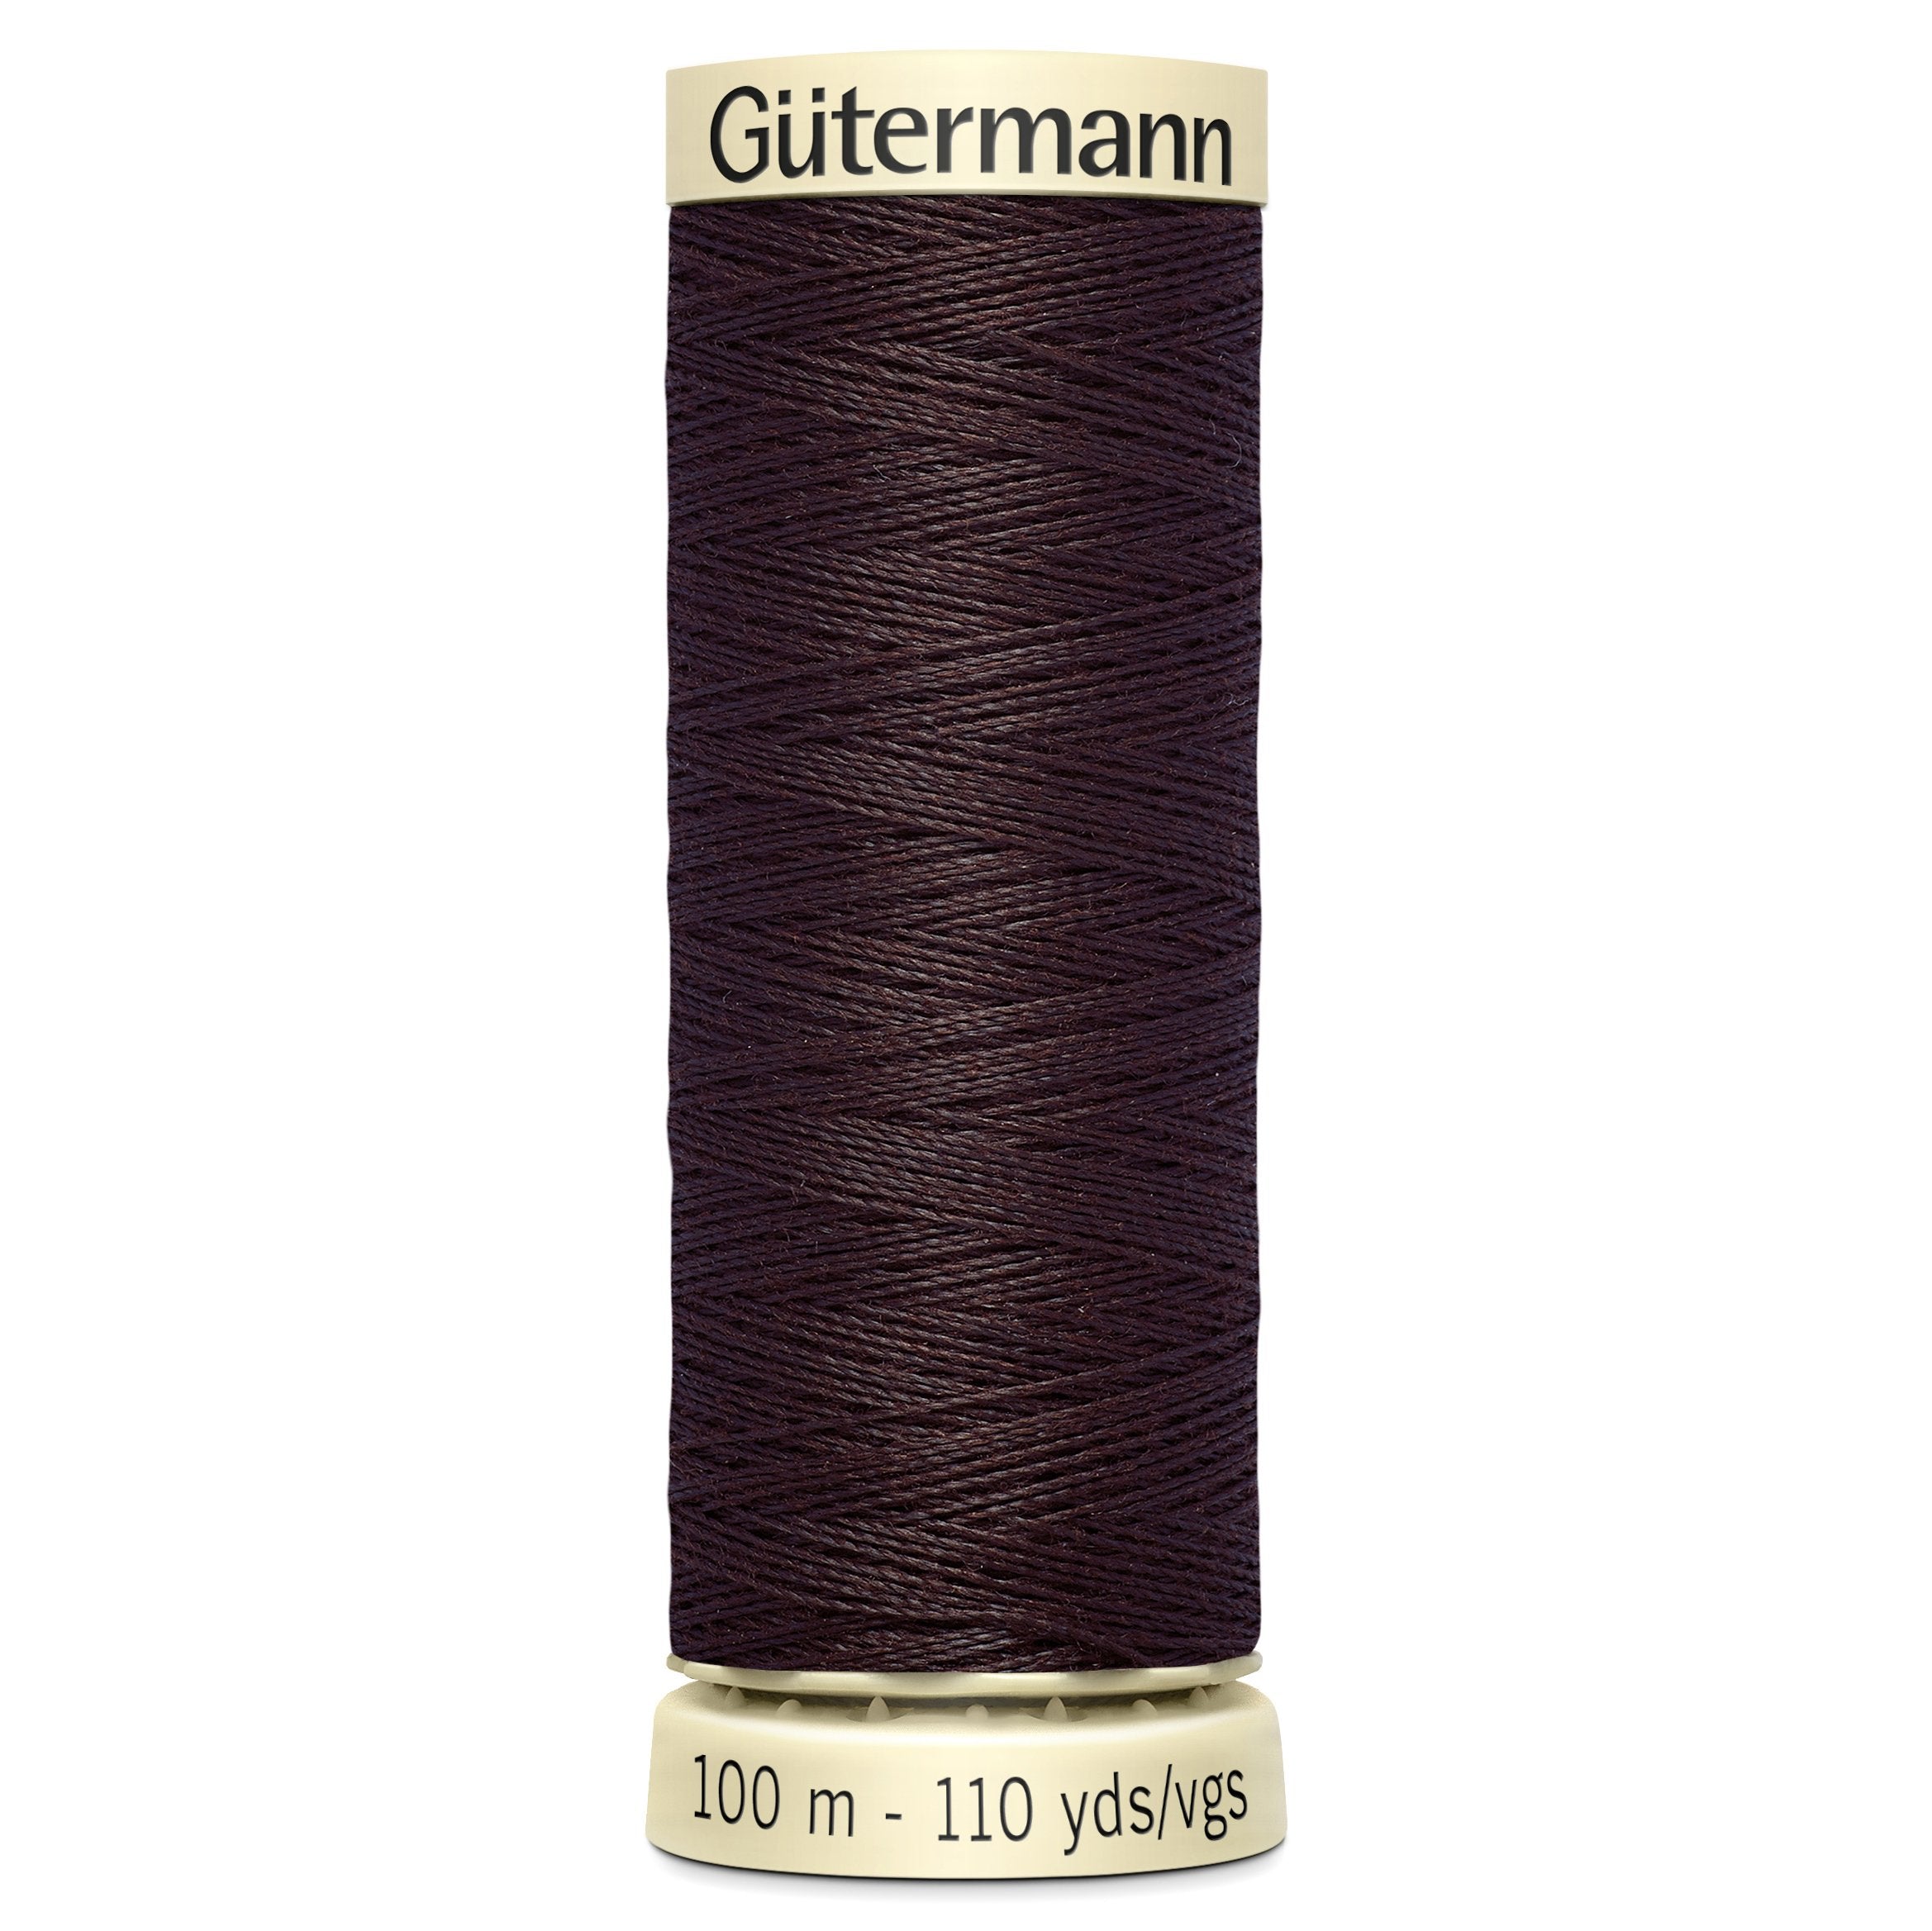 Gutermann Sew-All Polyester Sewing Thread 23 Dark Brown from Jaycotts Sewing Supplies